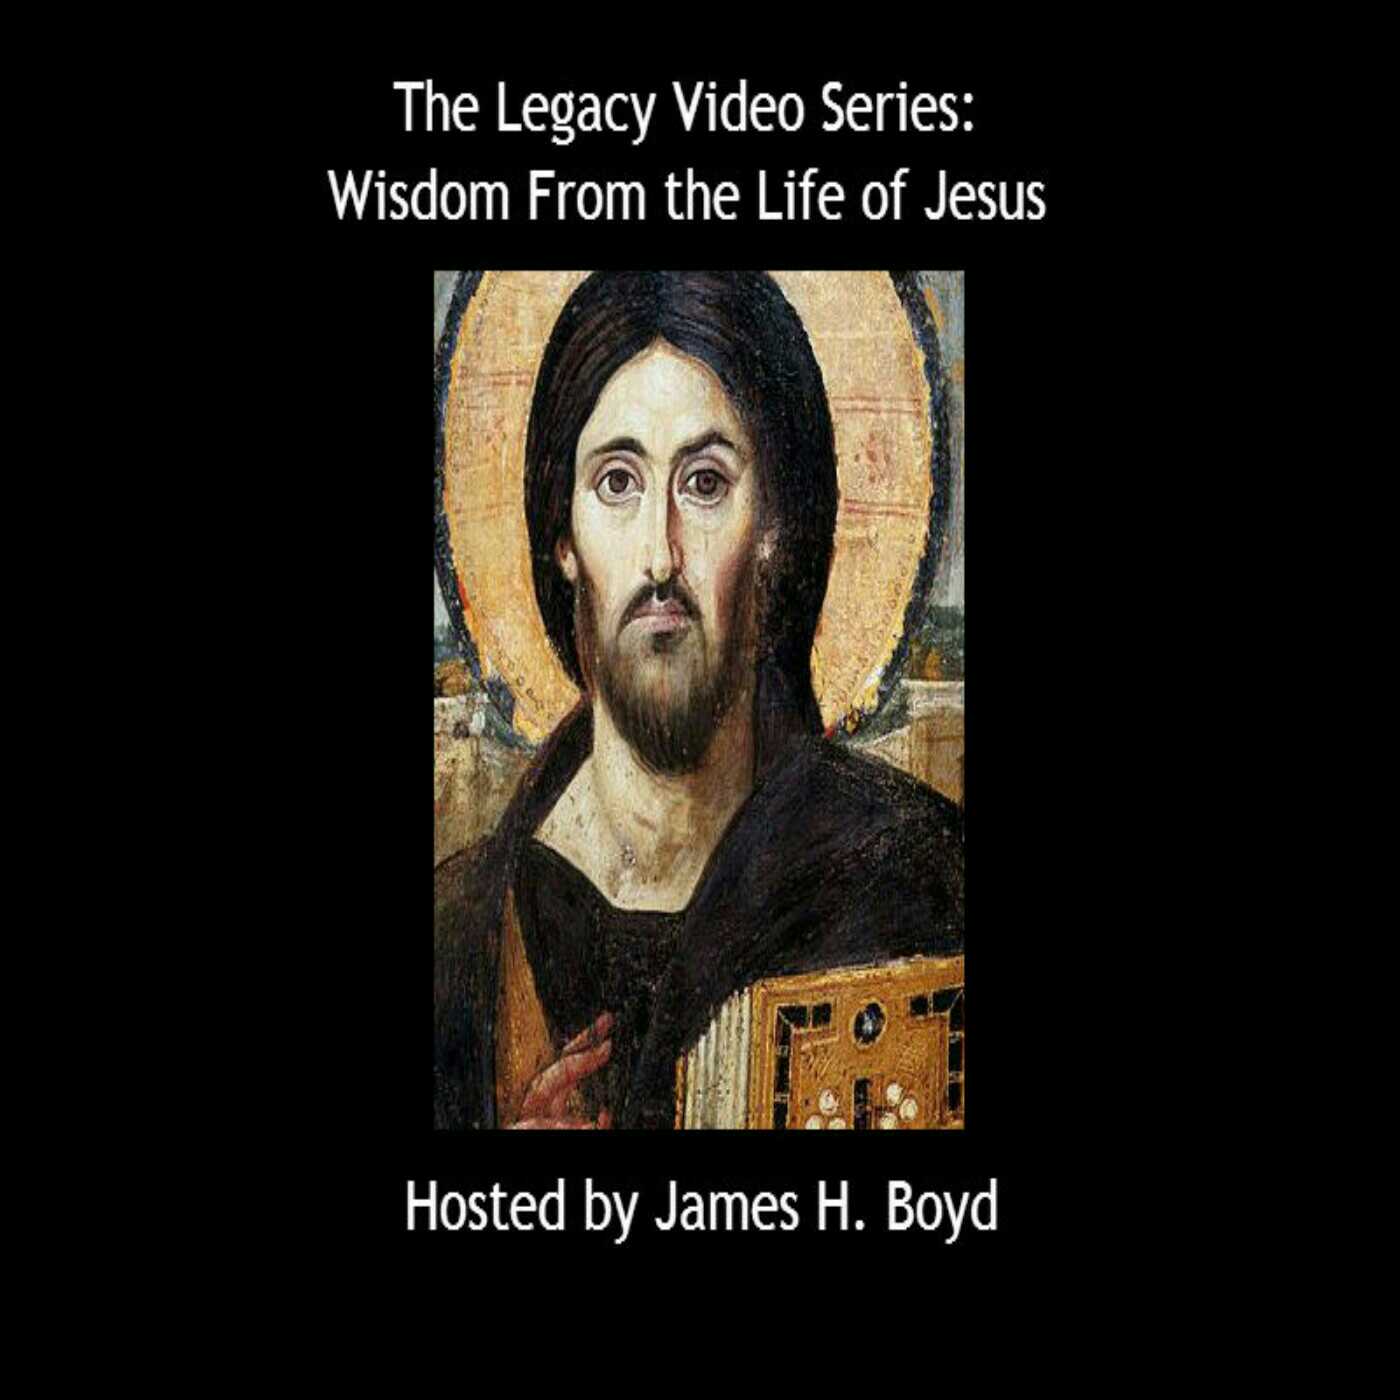 Episode 6: Jesus' Early Years